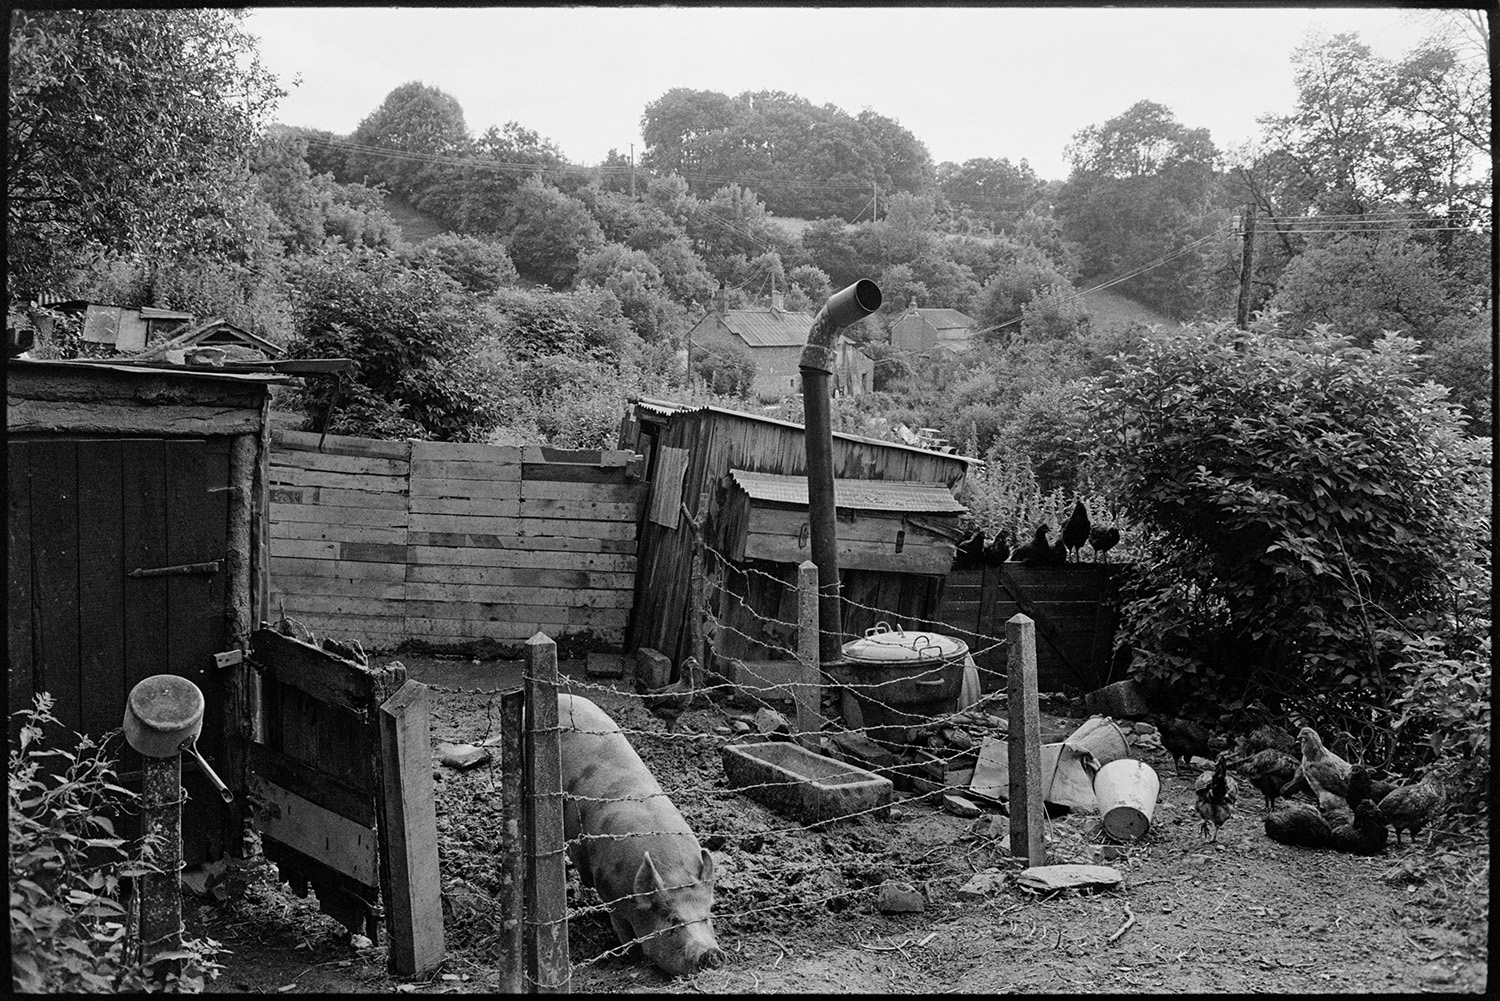 House with messy yard and ducks. 
[A pig in a muddy pigsty with a stone trough at Millhams, Dolton. A wooden shed and chickens are by the pigsty and cottages can be seen in the wooded valley in the background.]